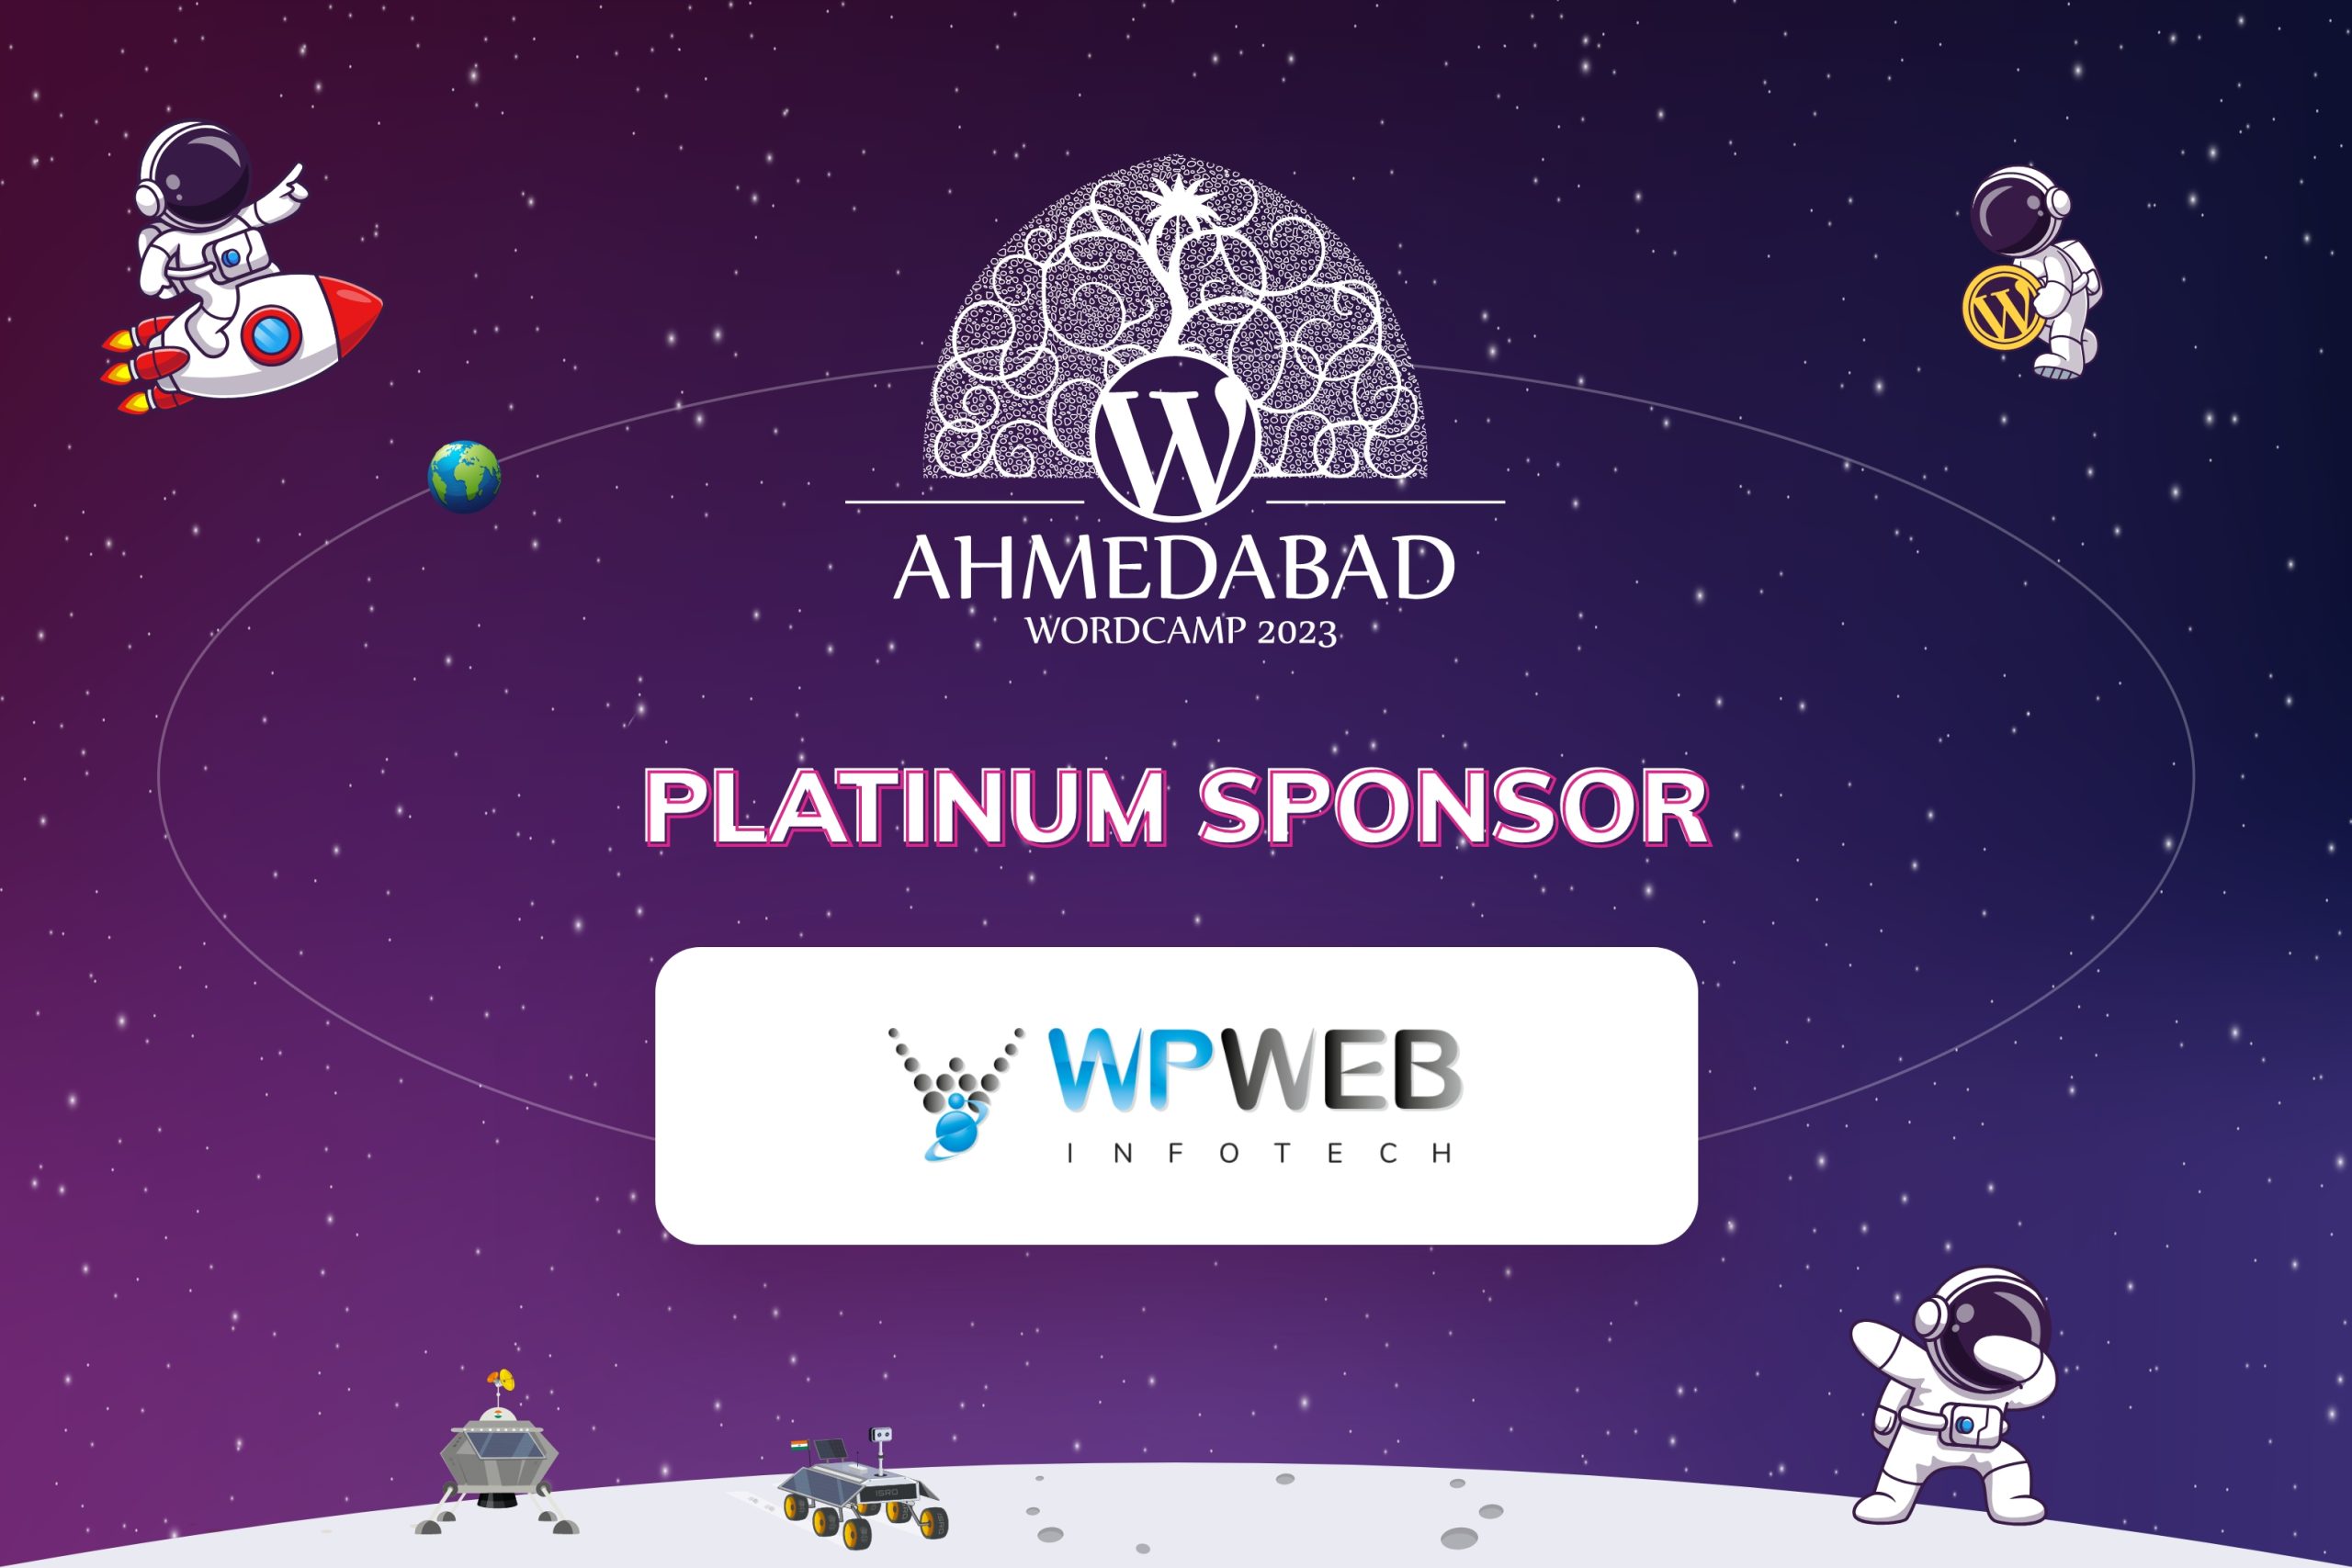 Thank You WPWeb Infotech, for being our Platinum Sponsor